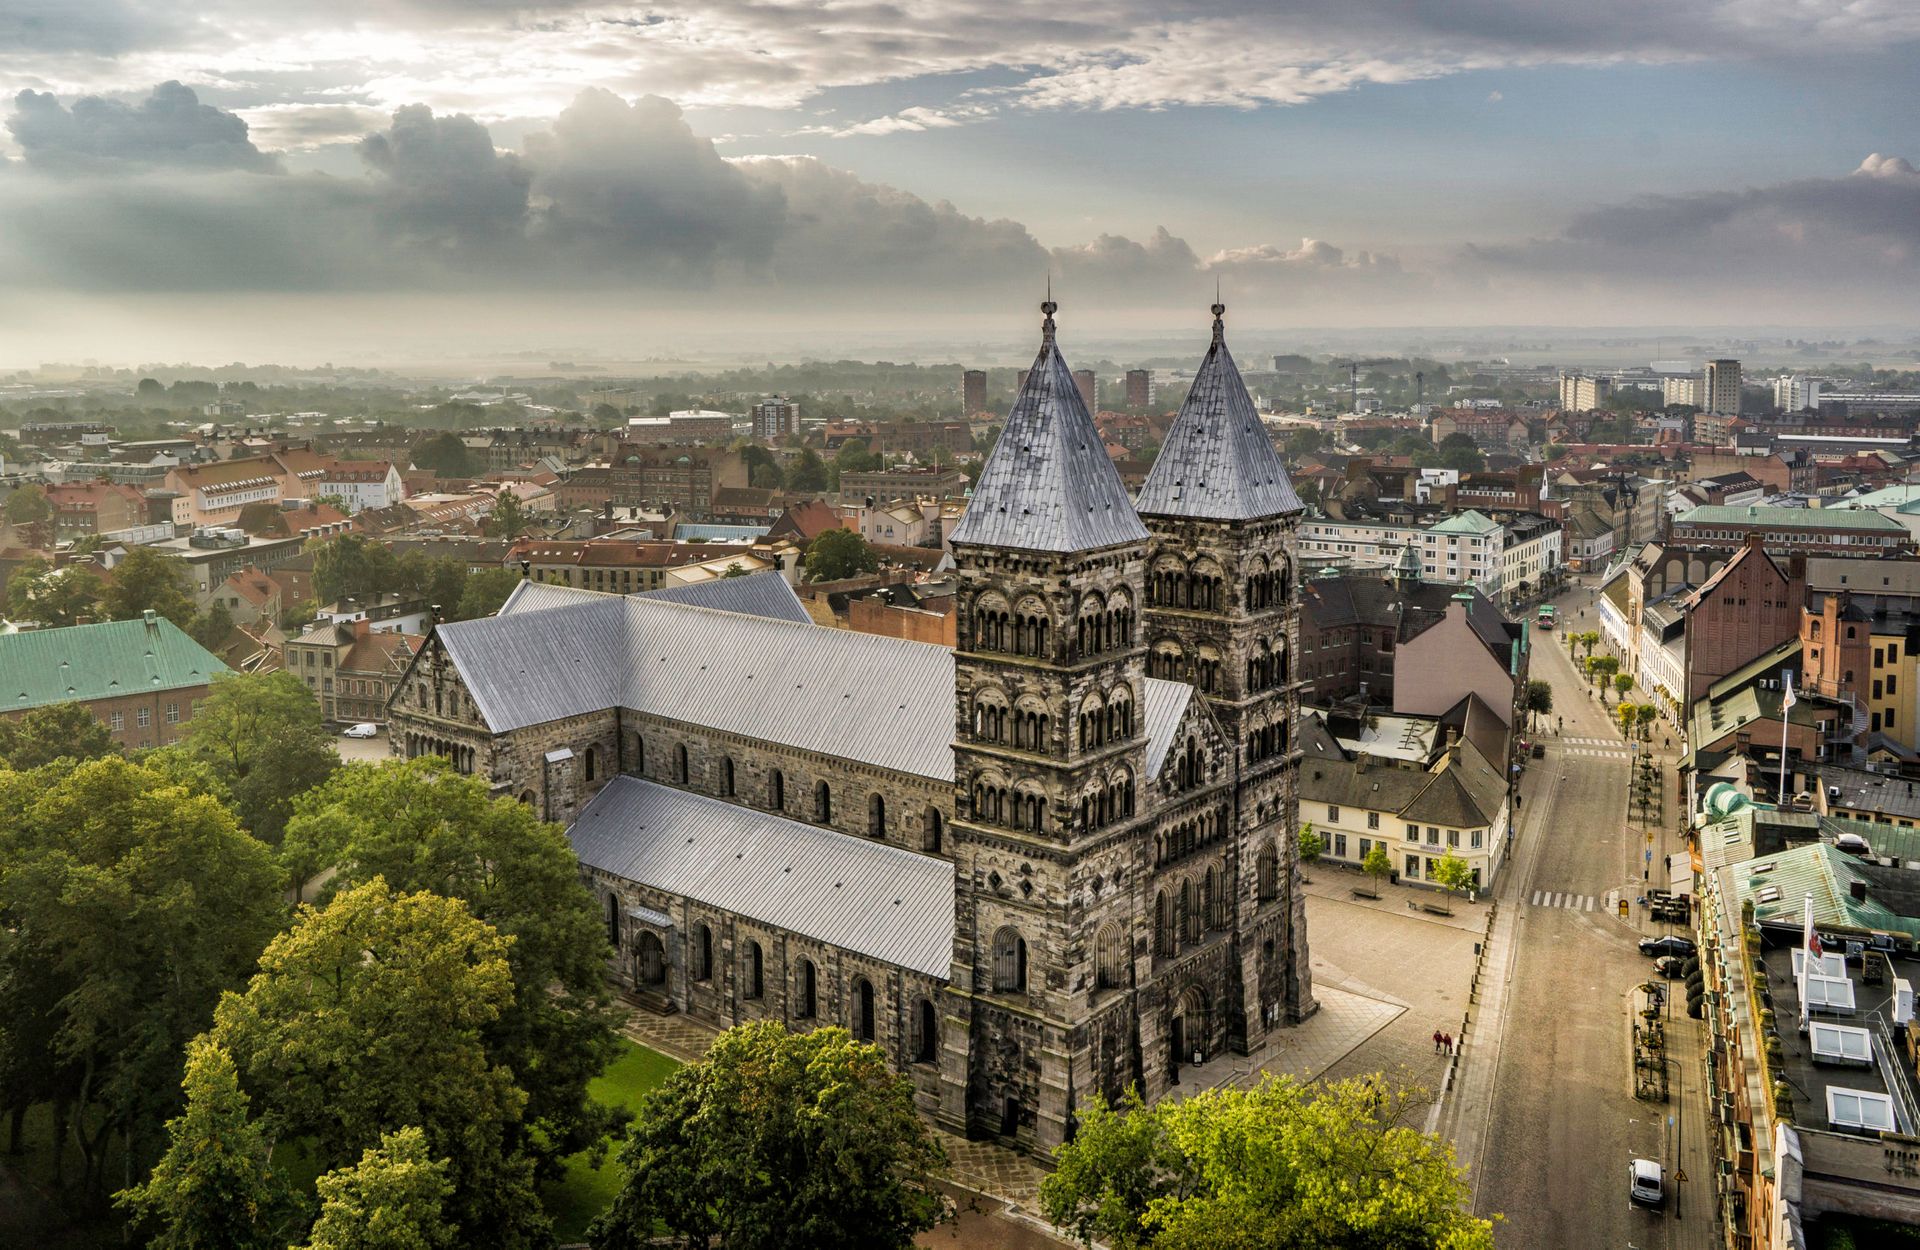 A shot of a large, brick cathedral taken from above.